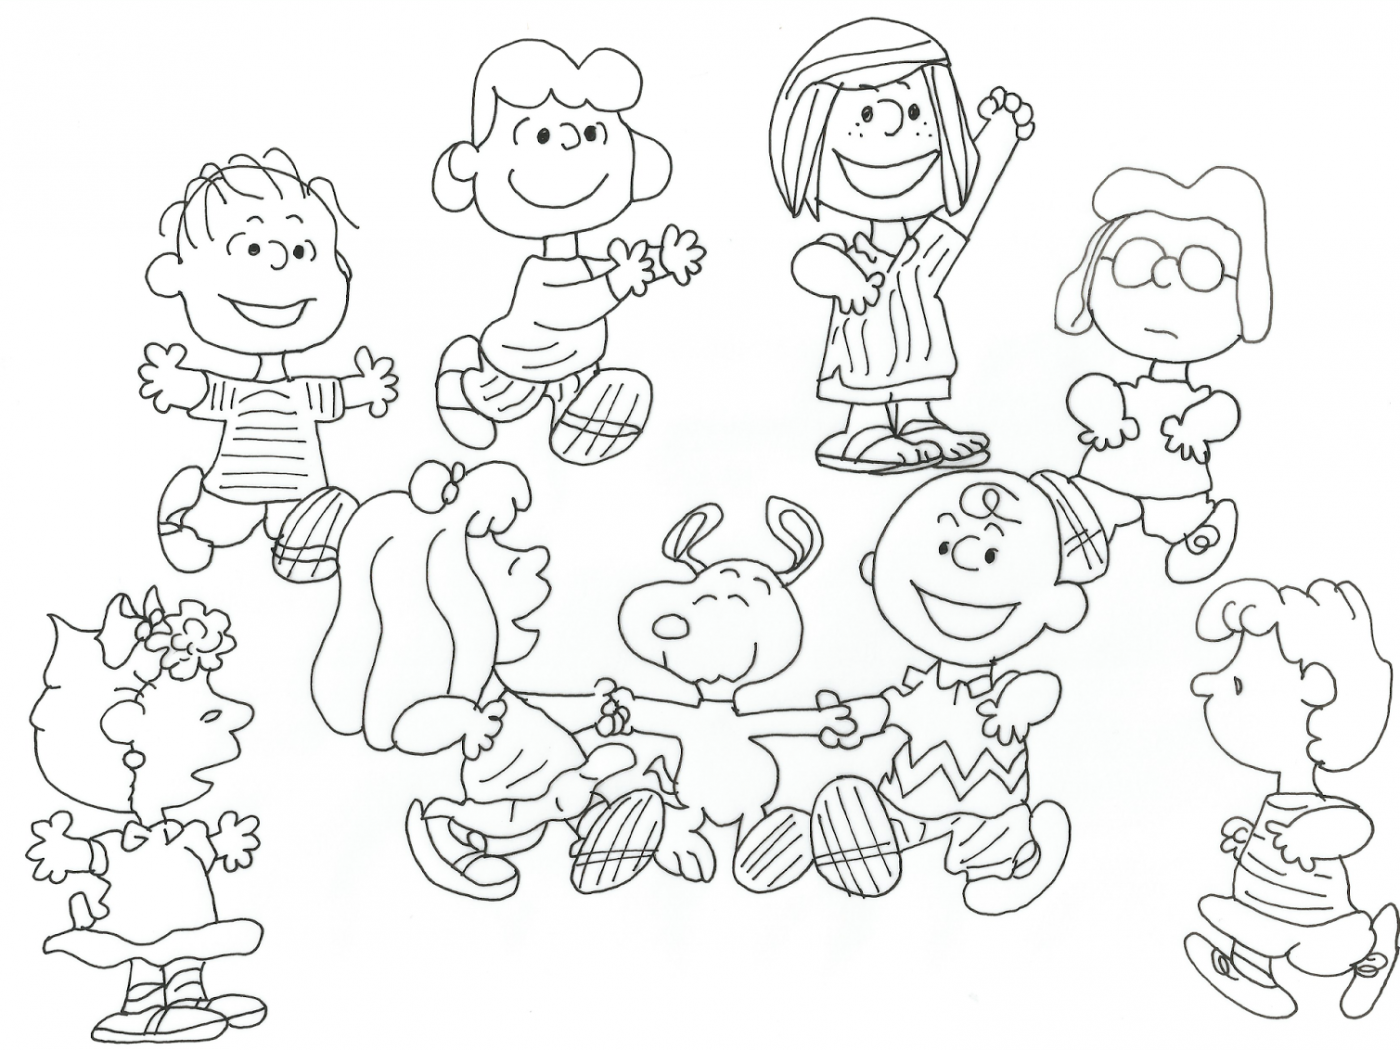 Peanuts Movie Coloring Pages at GetDrawings | Free download